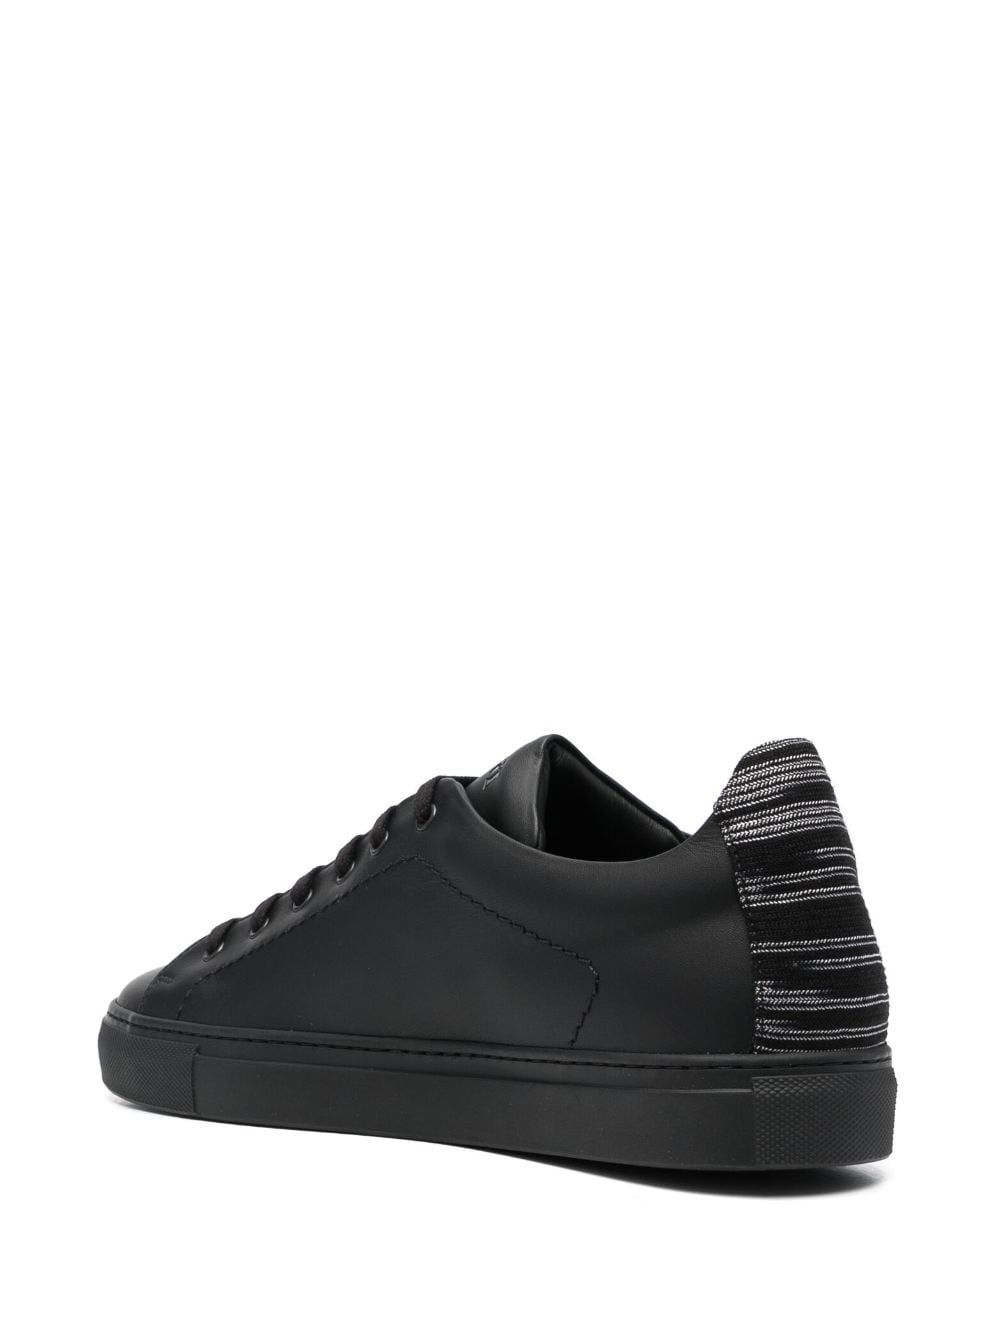 woven-heel counter leather sneakers - 3